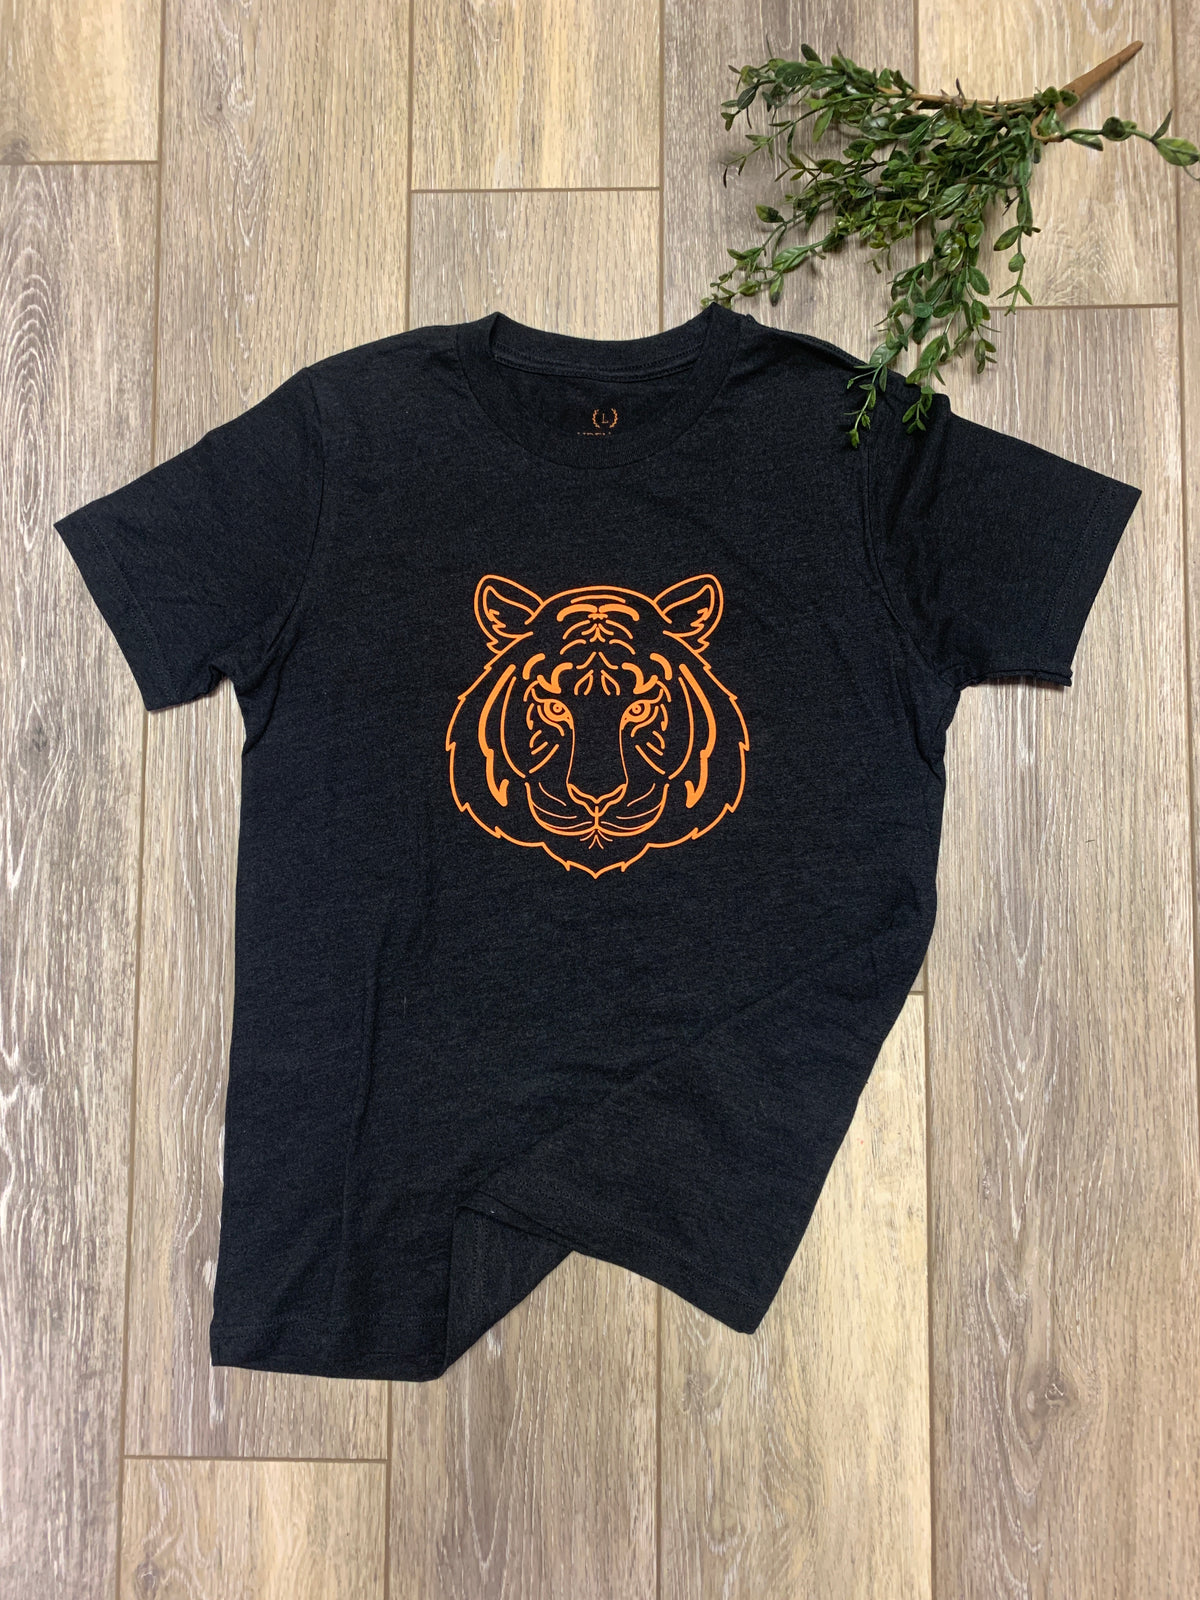 Tiger Face T-Shirt on Black-YOUTH--Lemons and Limes Boutique